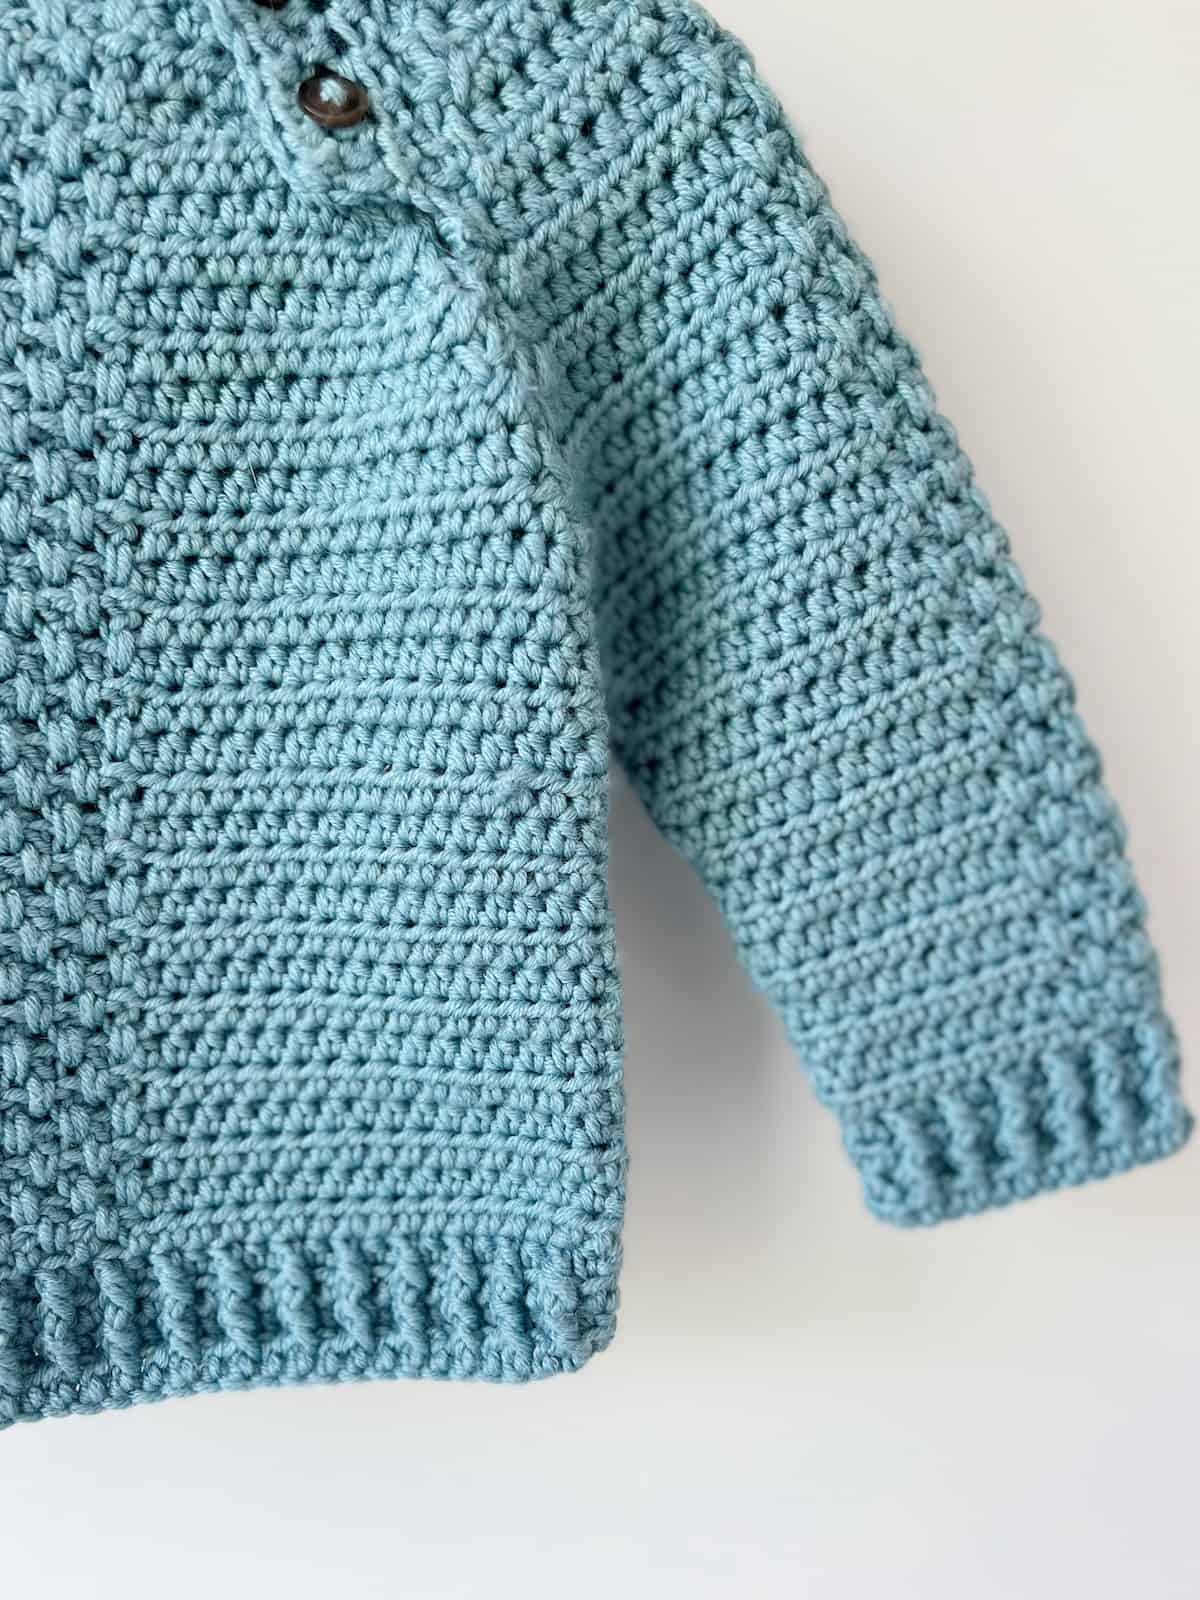 Close up of crochet sweater for babies with front and back post stitch cuffs.